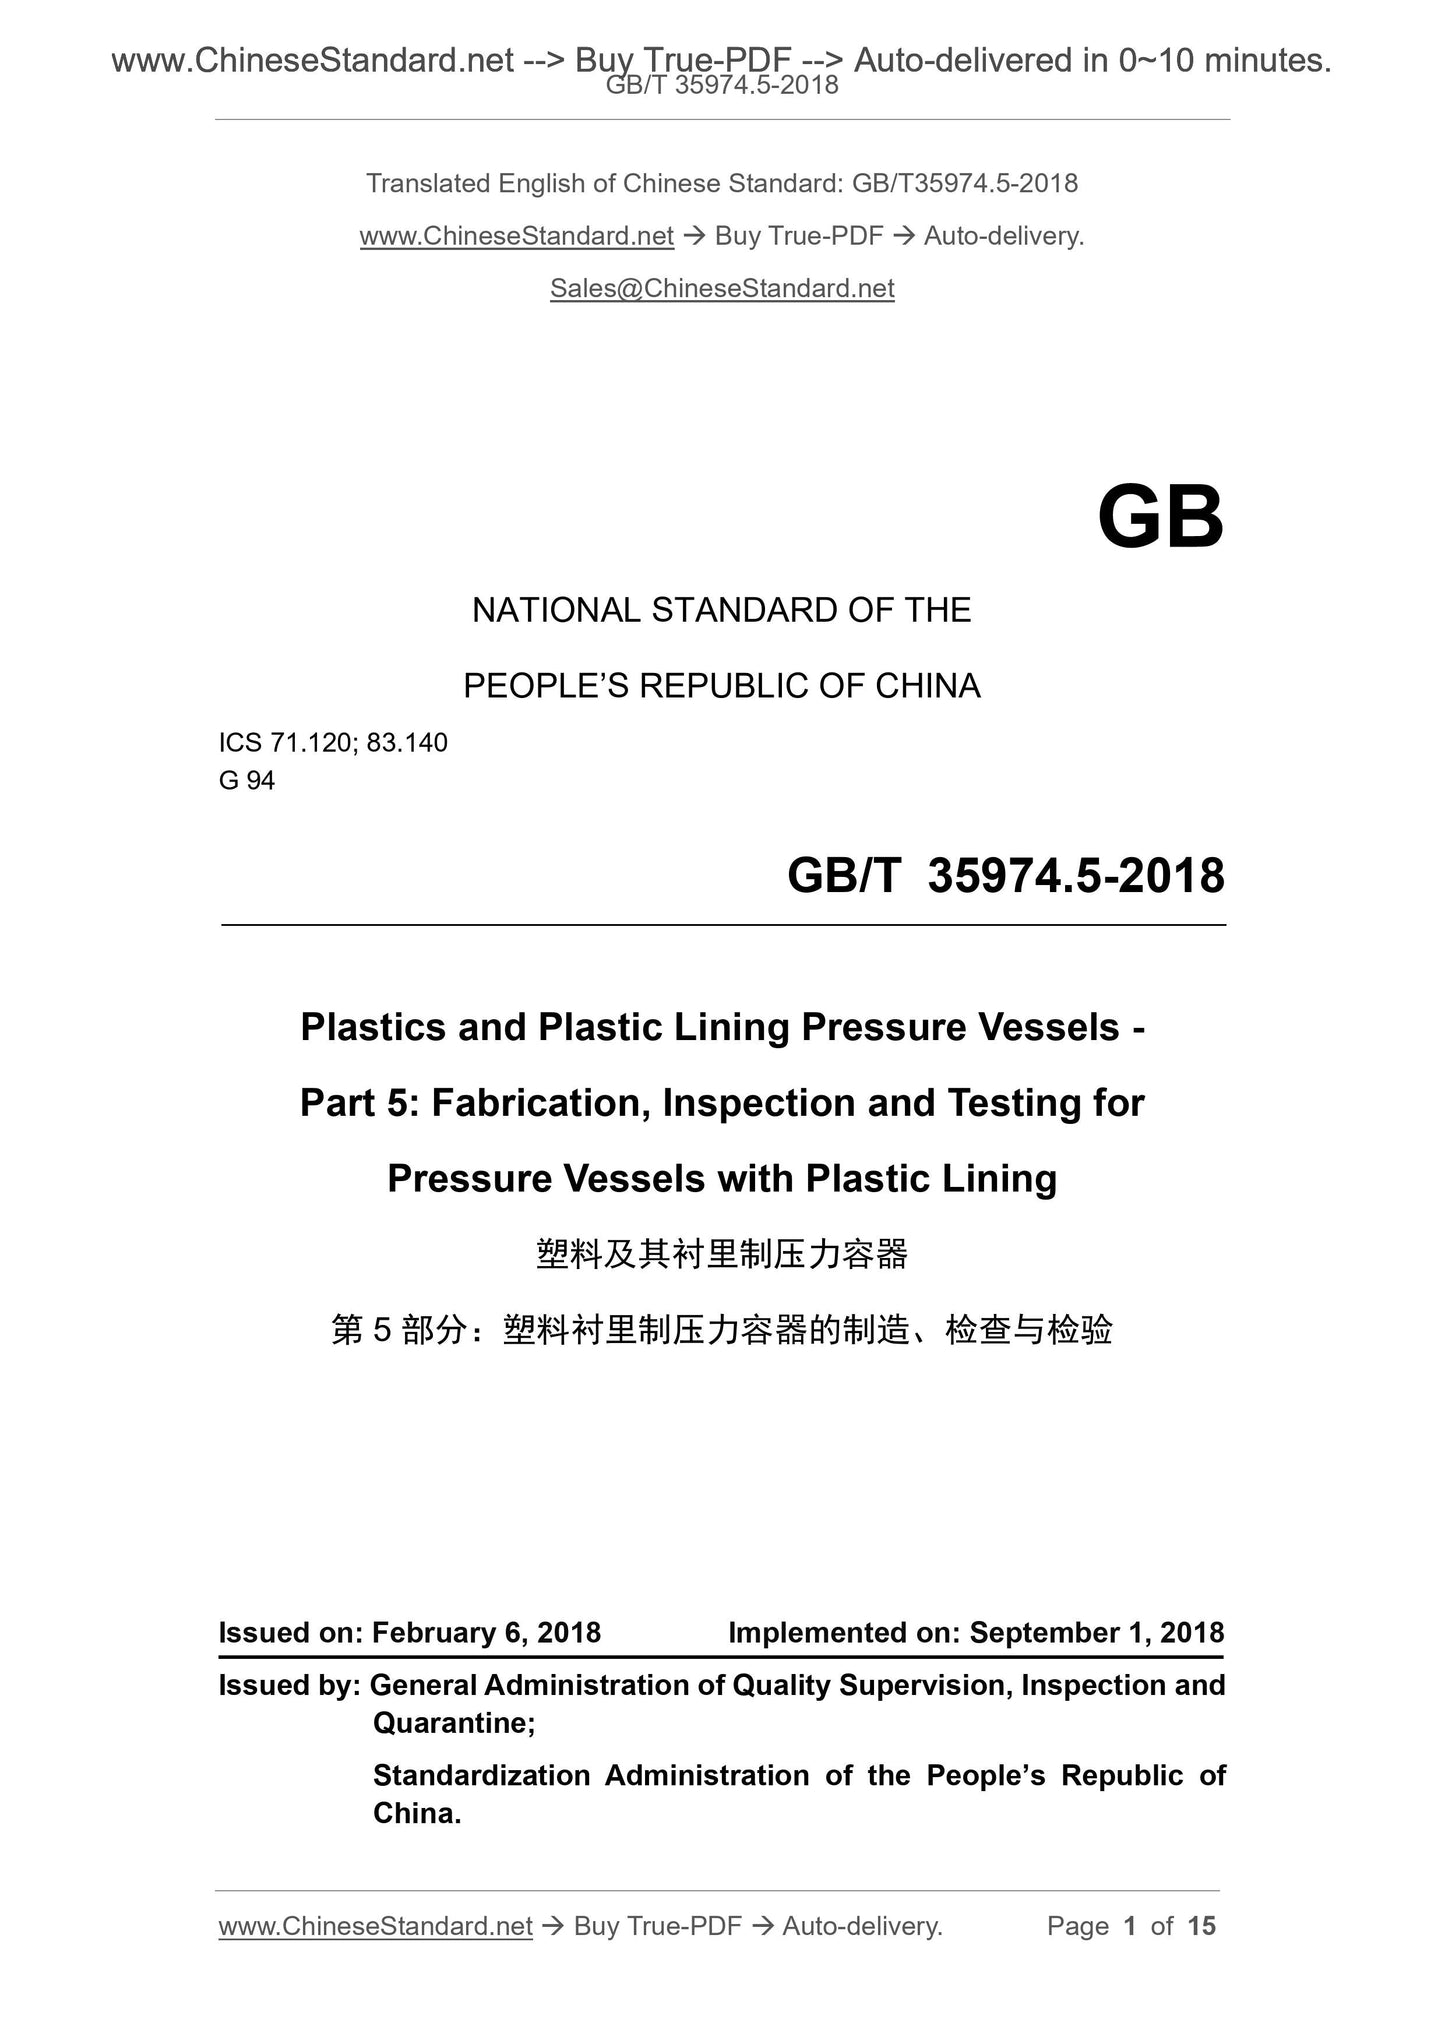 GB/T 35974.5-2018 Page 1